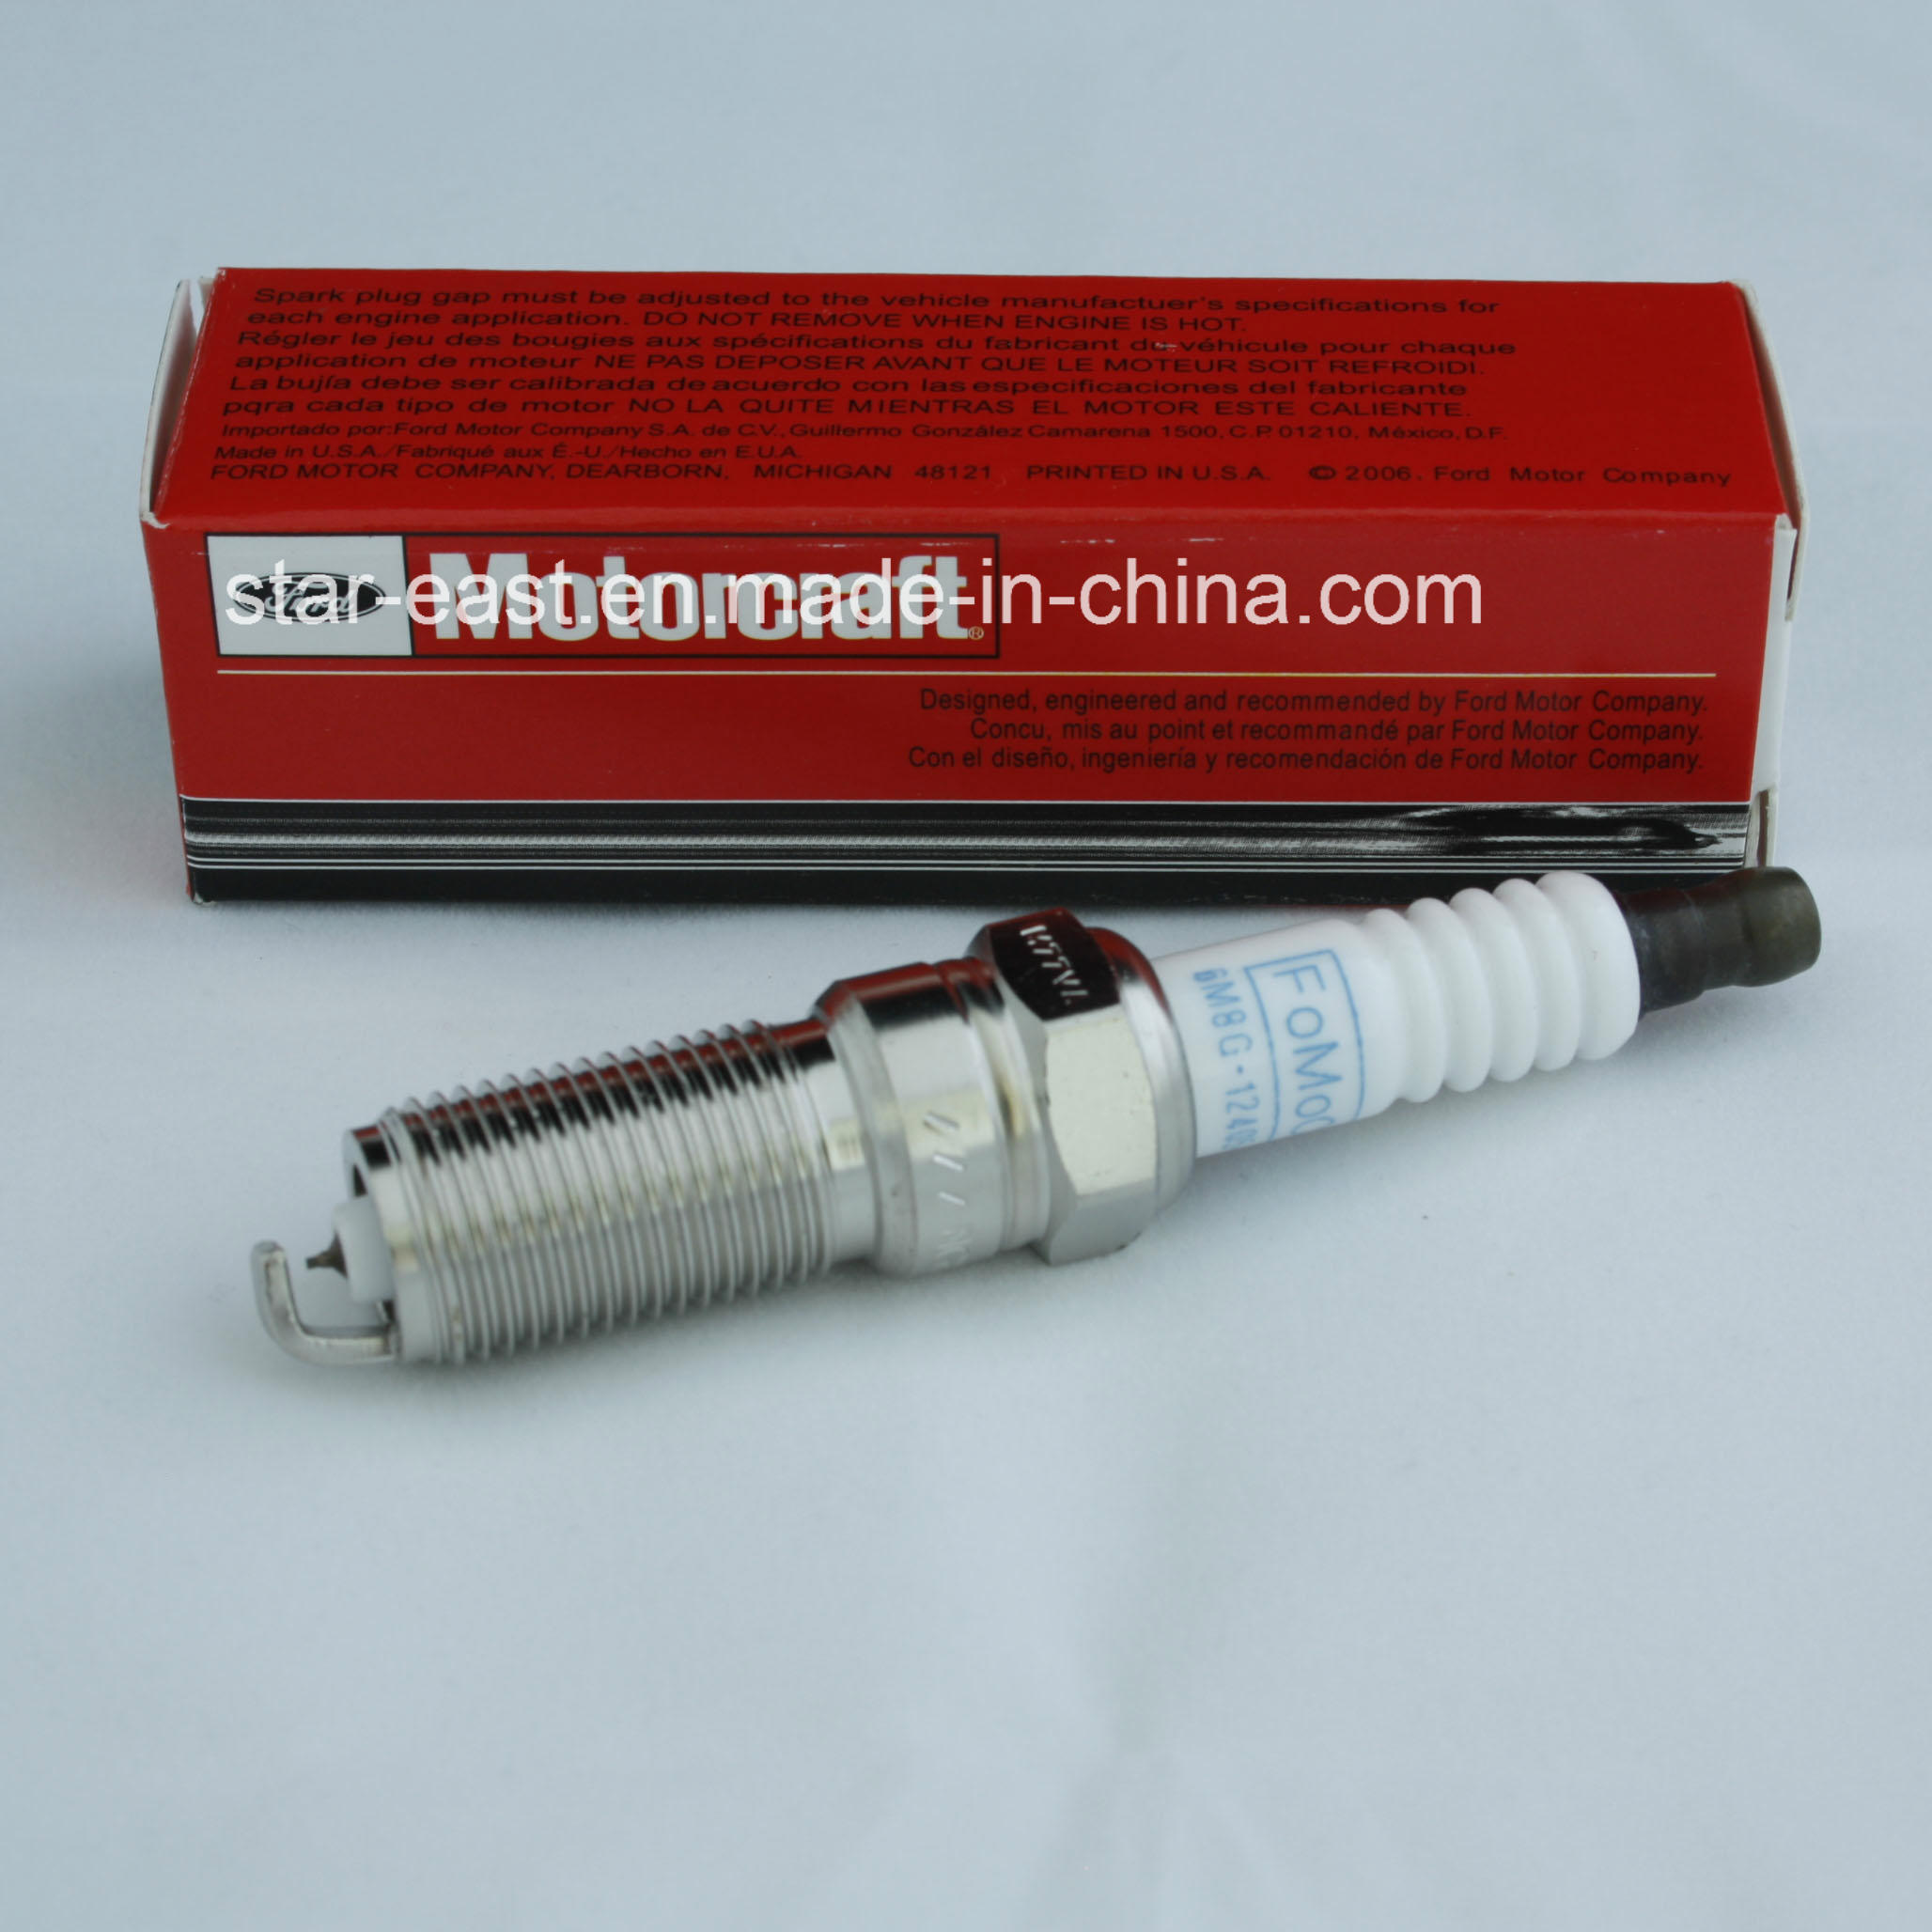 Spark Plug for Sp 432 for Ford